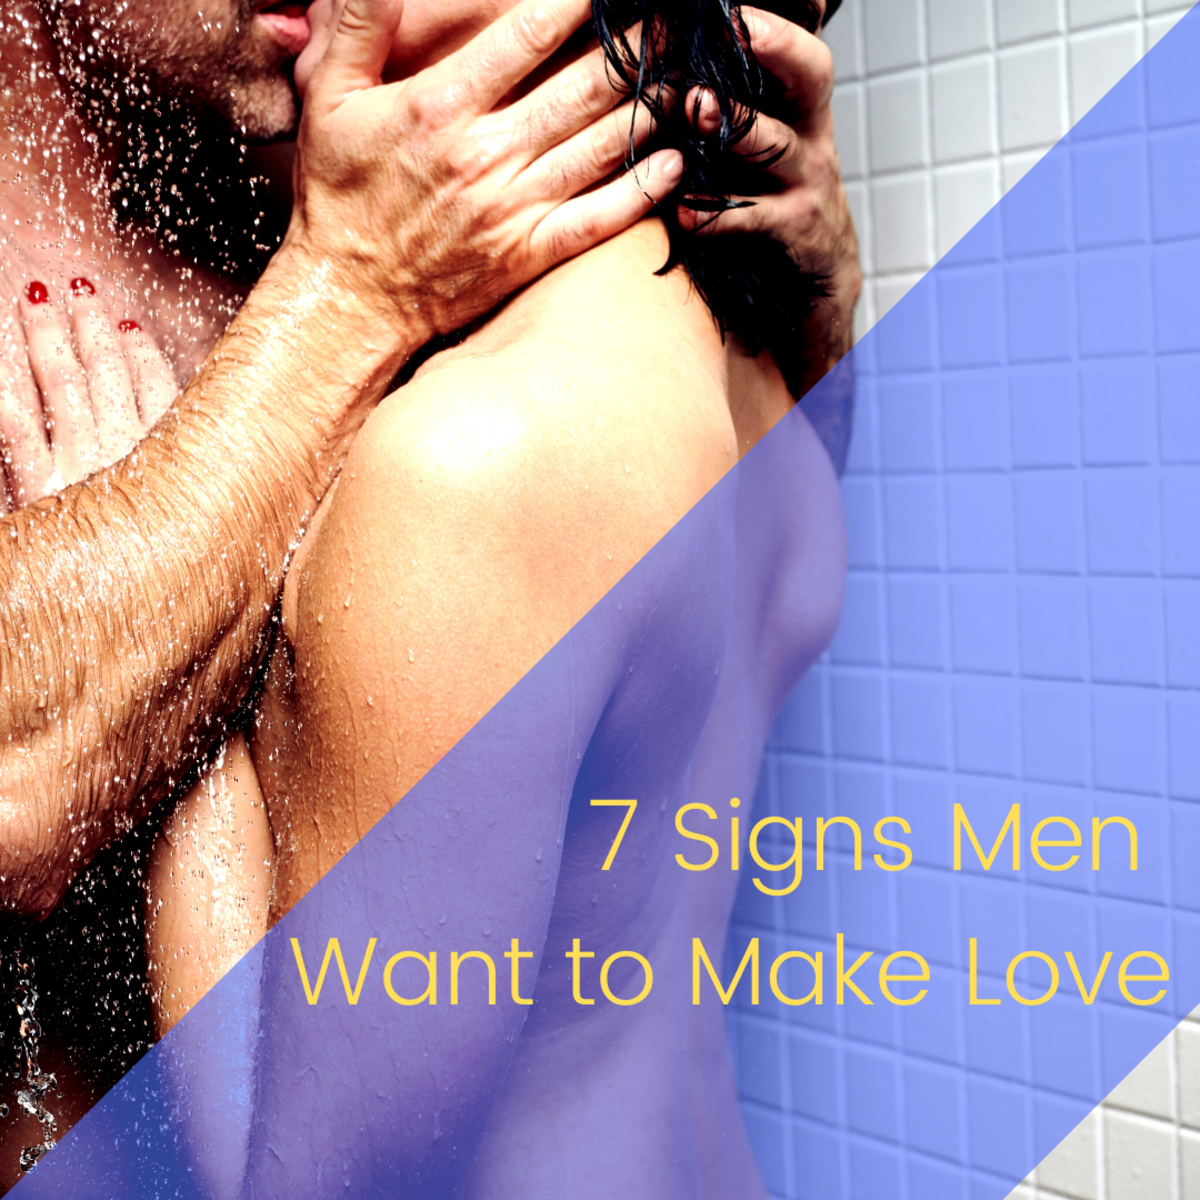 7 Signs That Men Want to Make Love